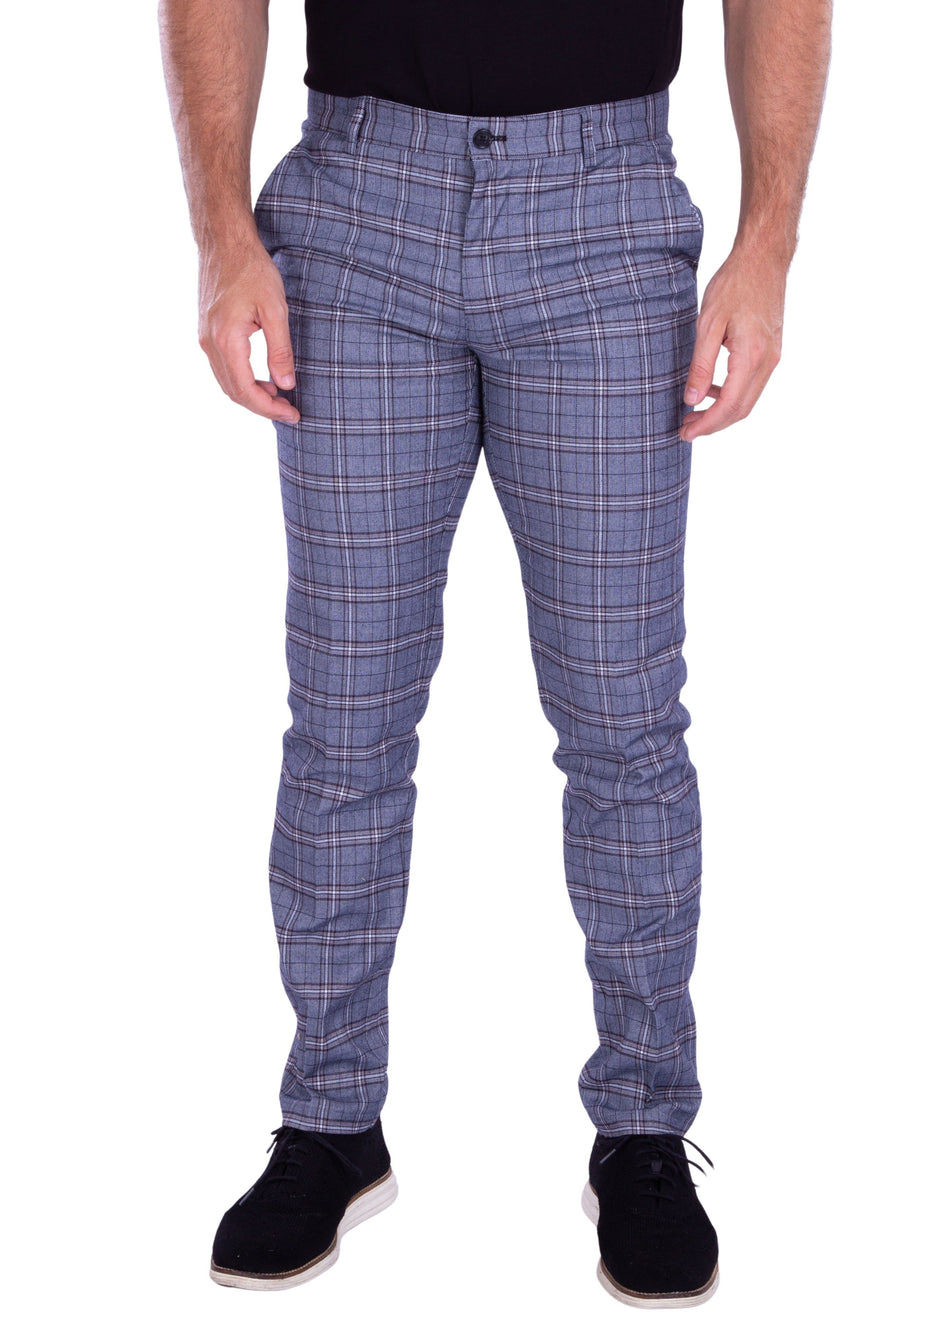 Gibson London | Men's Fawn Black Red Check Trouser | Suit Direct